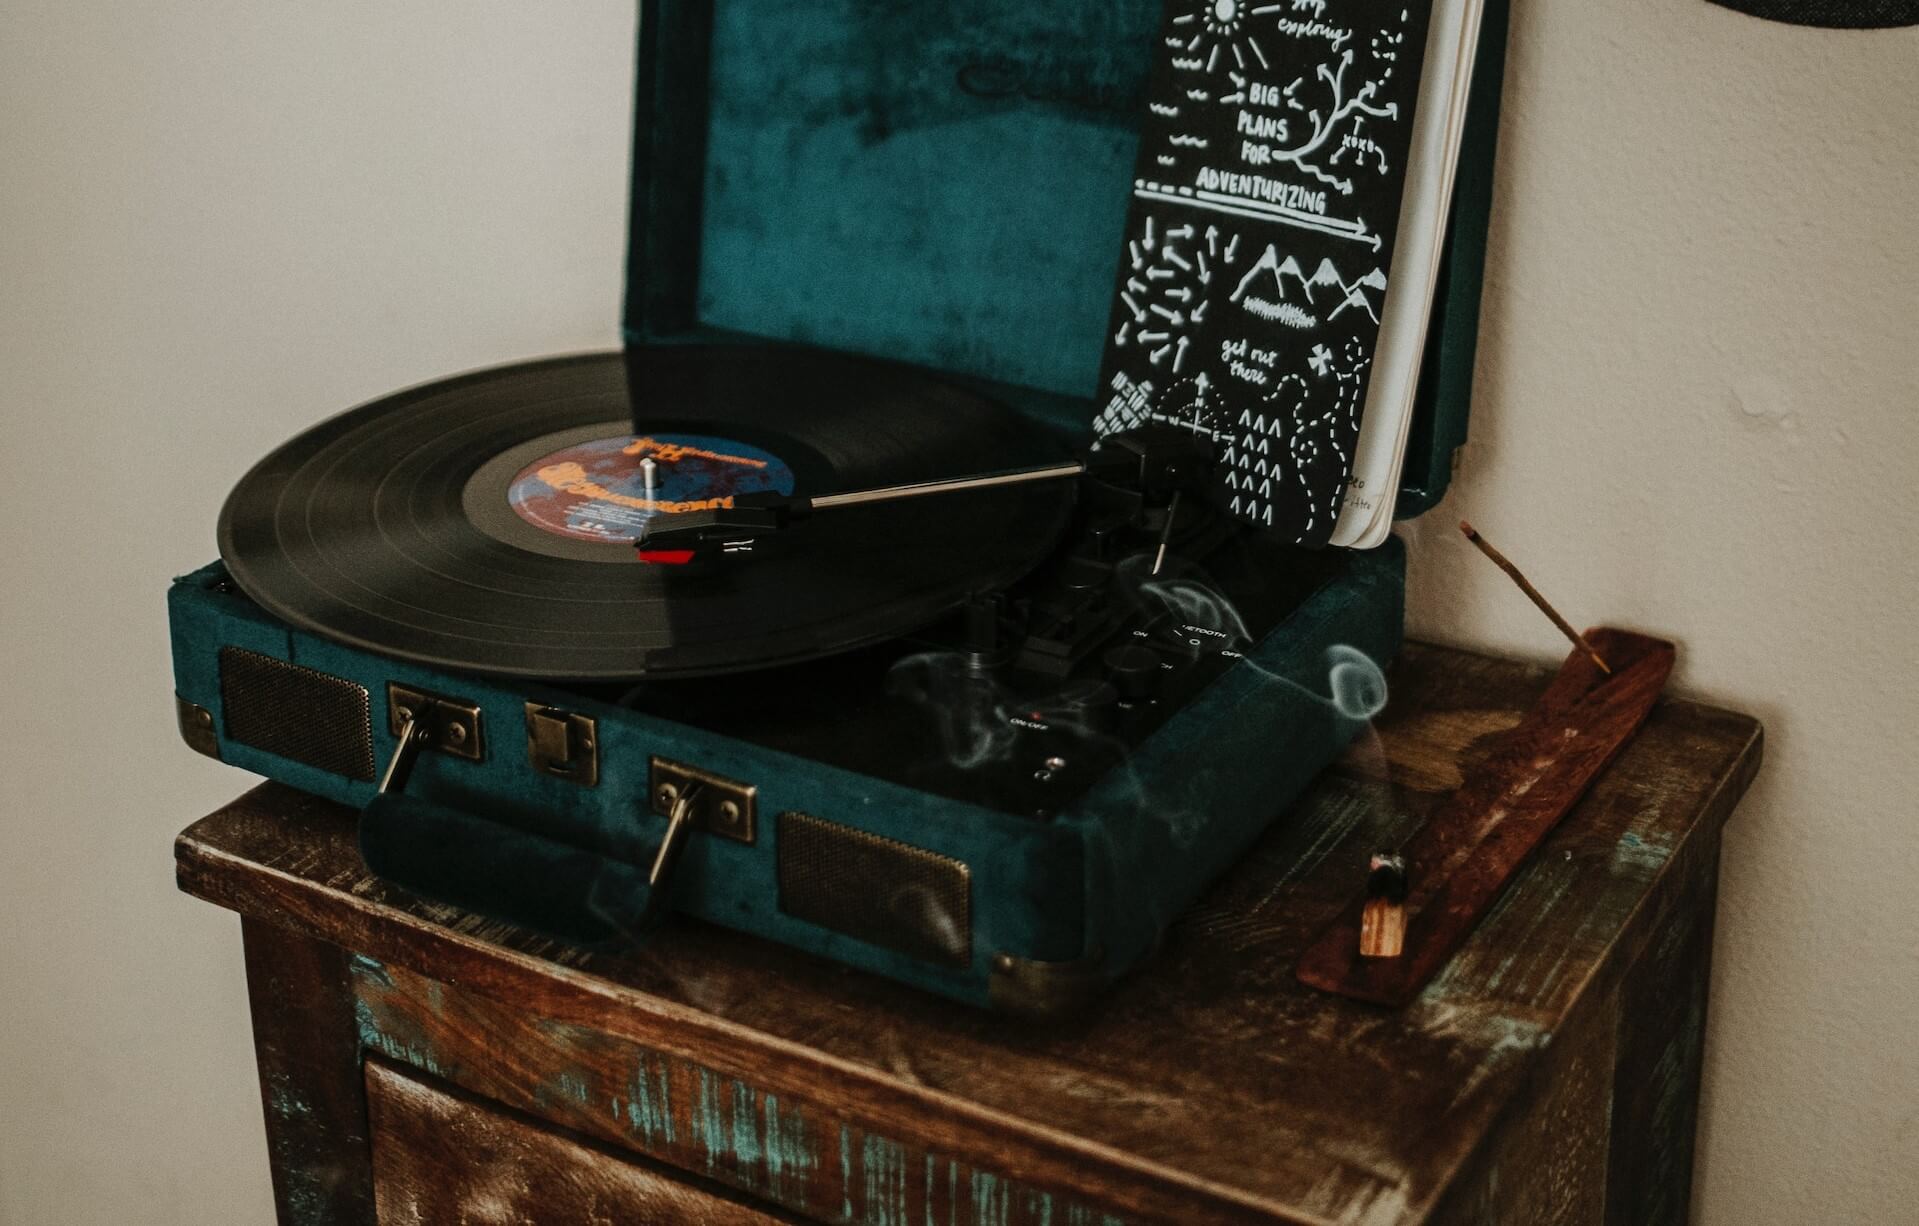 Vintage vinyl player placed on a retro-styled table.